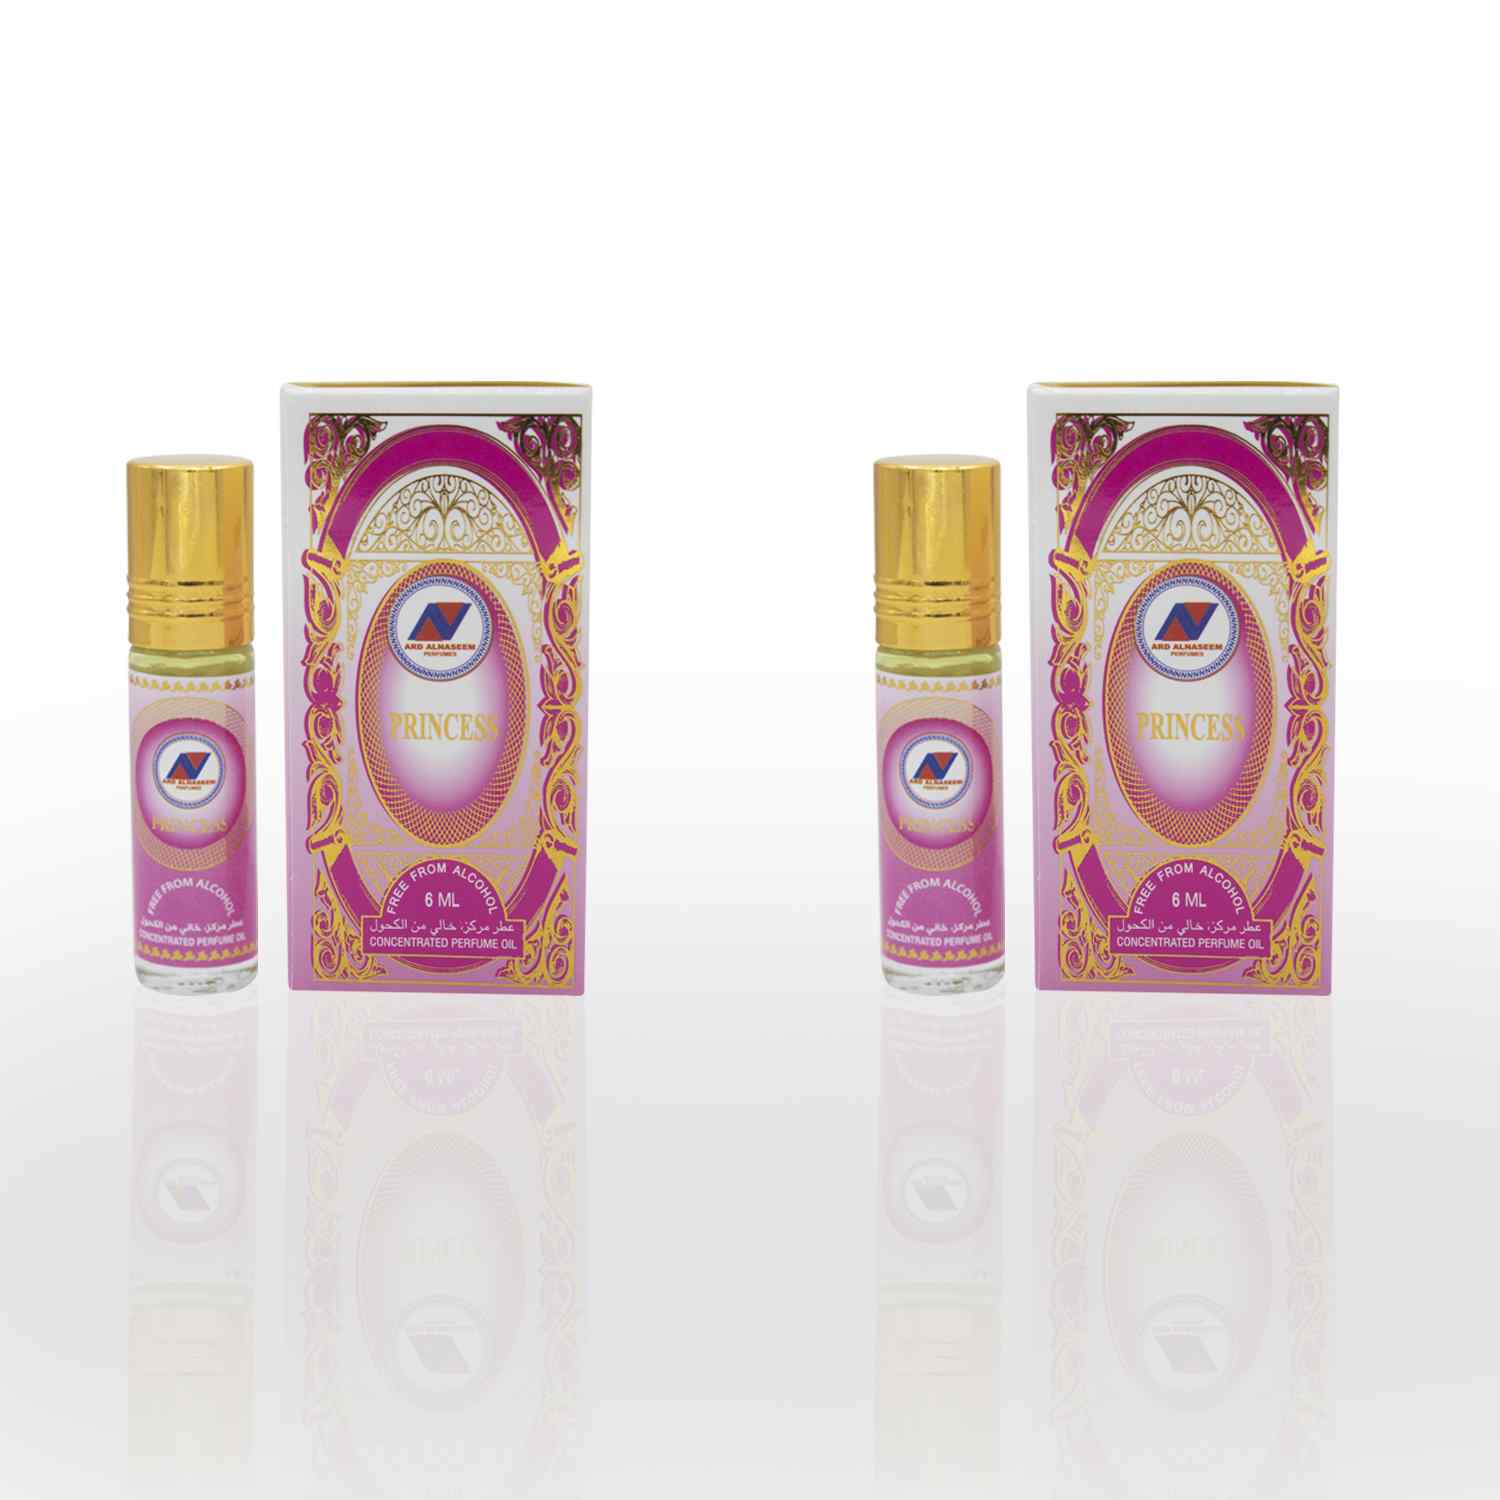 Princess concentrated oil attar rollon 6ml by Ard perfumes